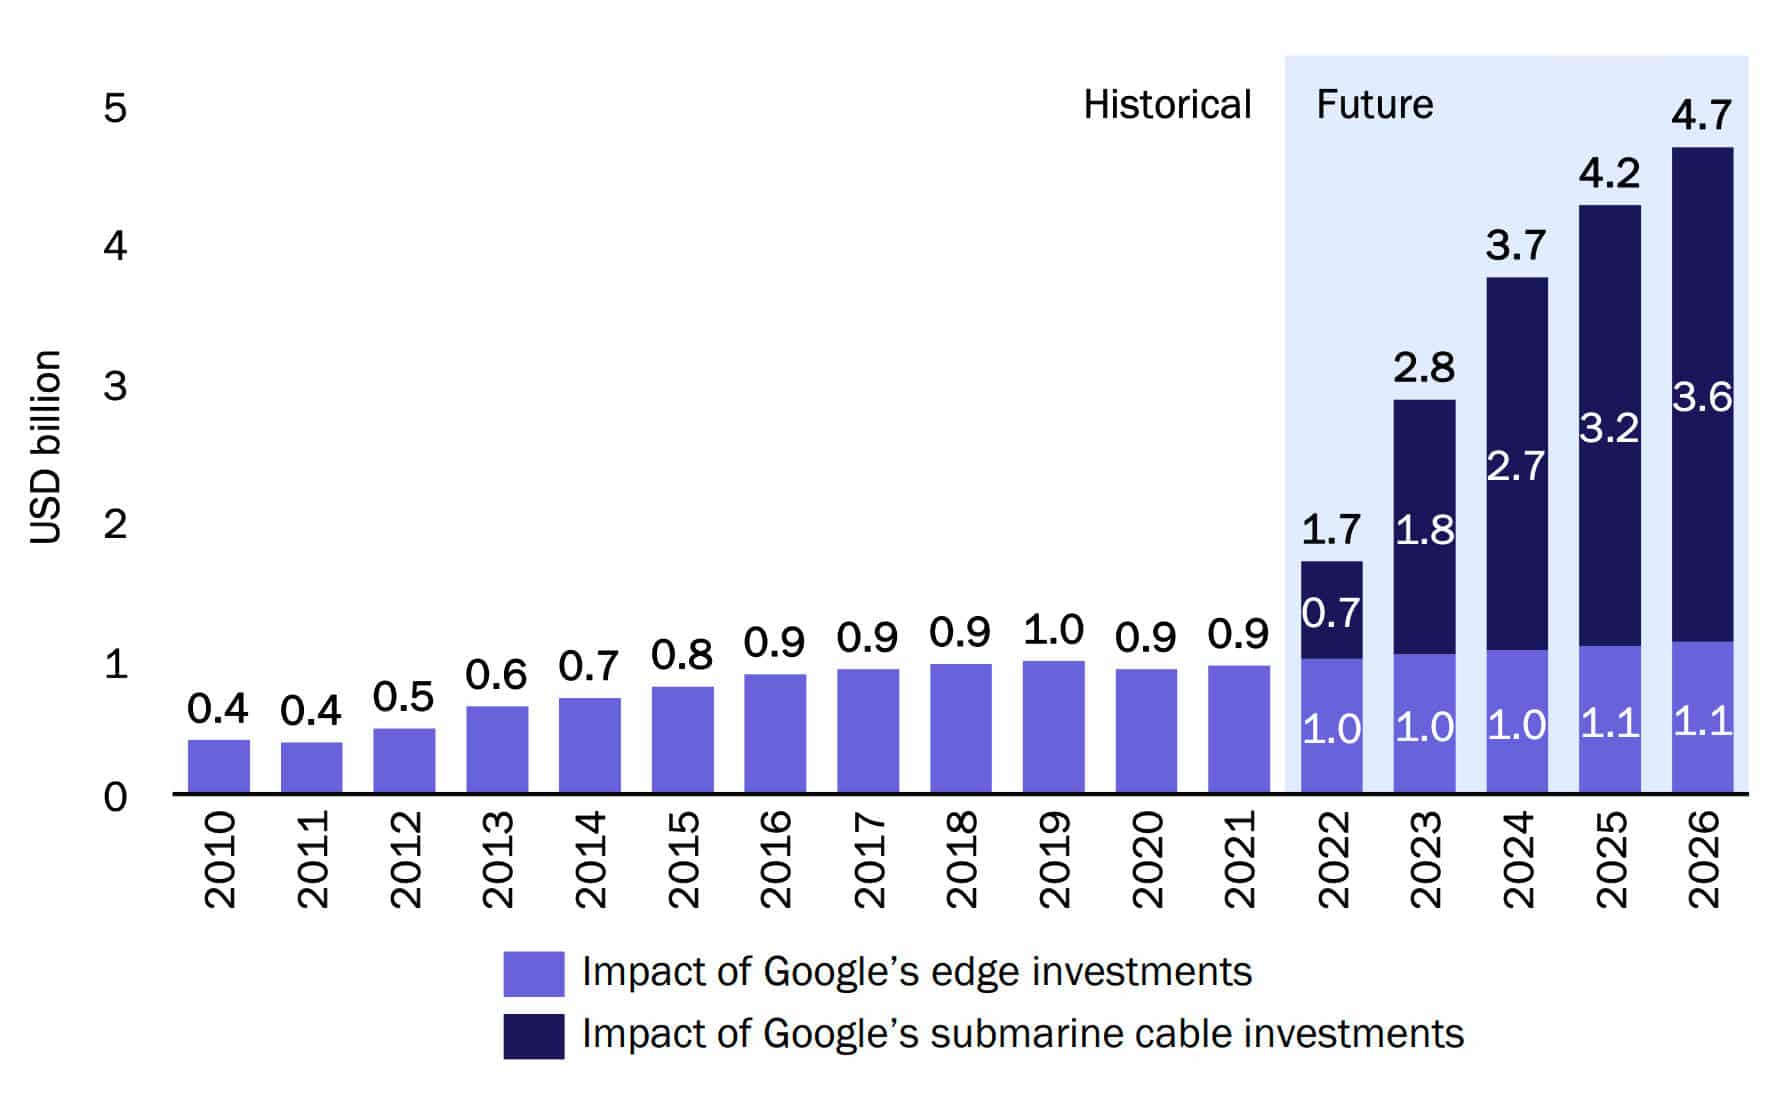 Increase in real GDP attributable to Google's network investments in Thailand